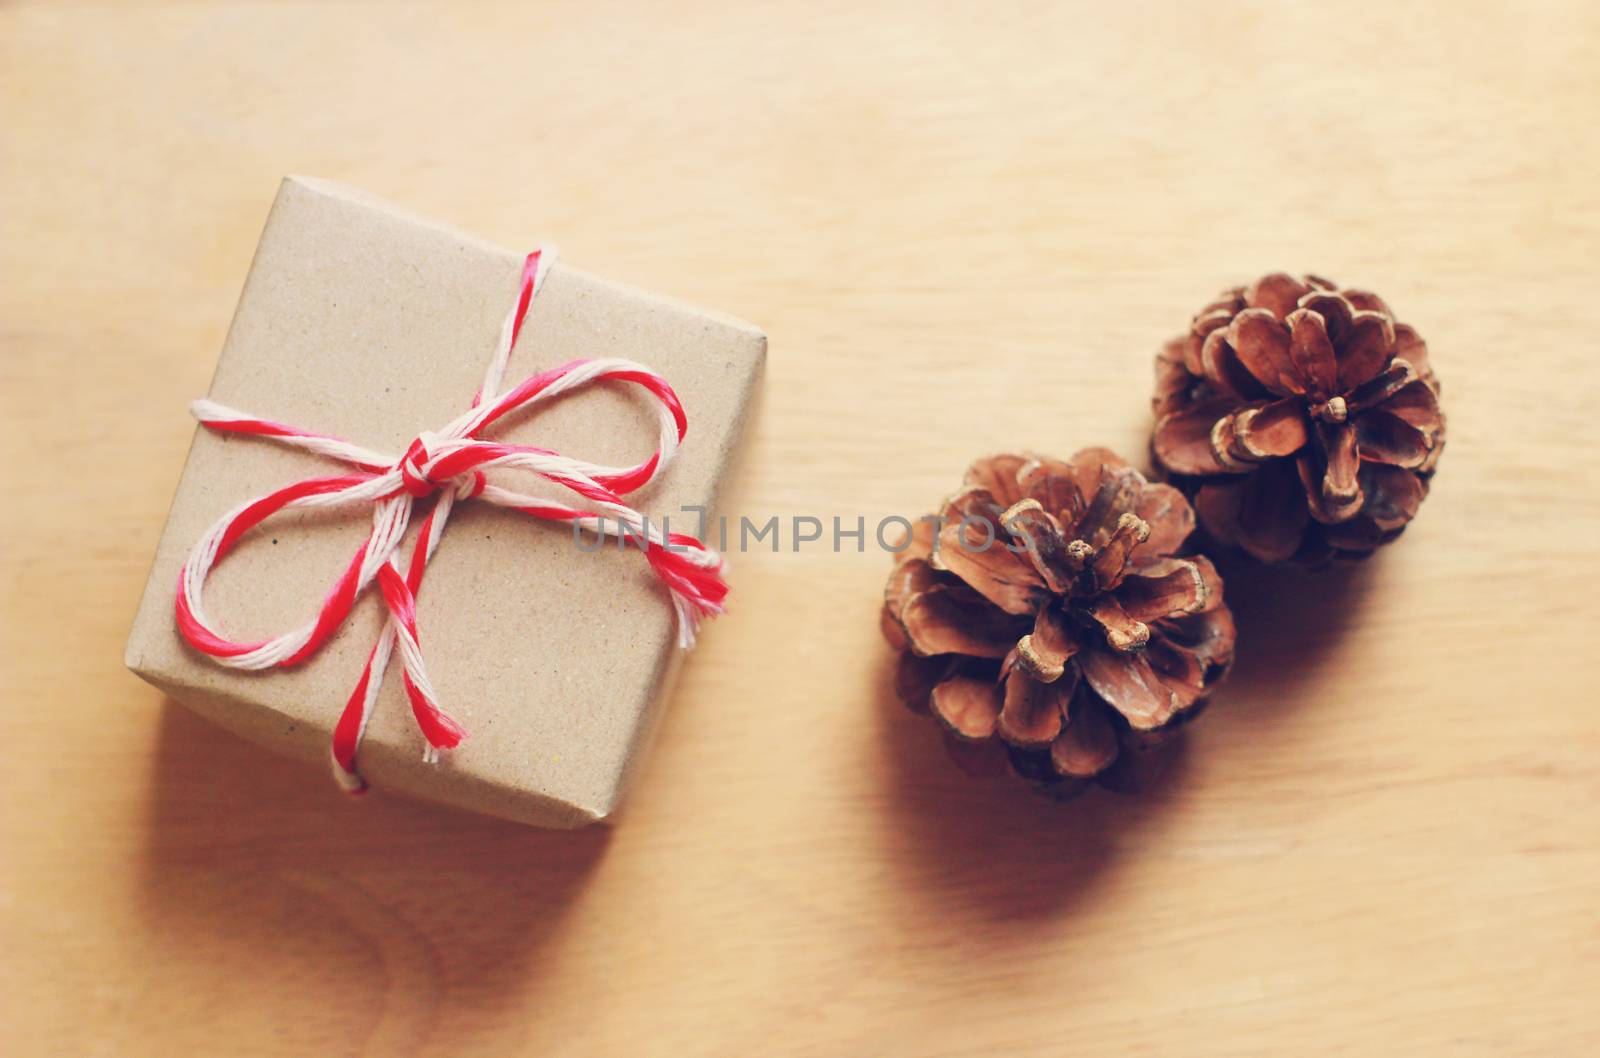 Handmade gift box and pine cone with retro filter effect by nuchylee